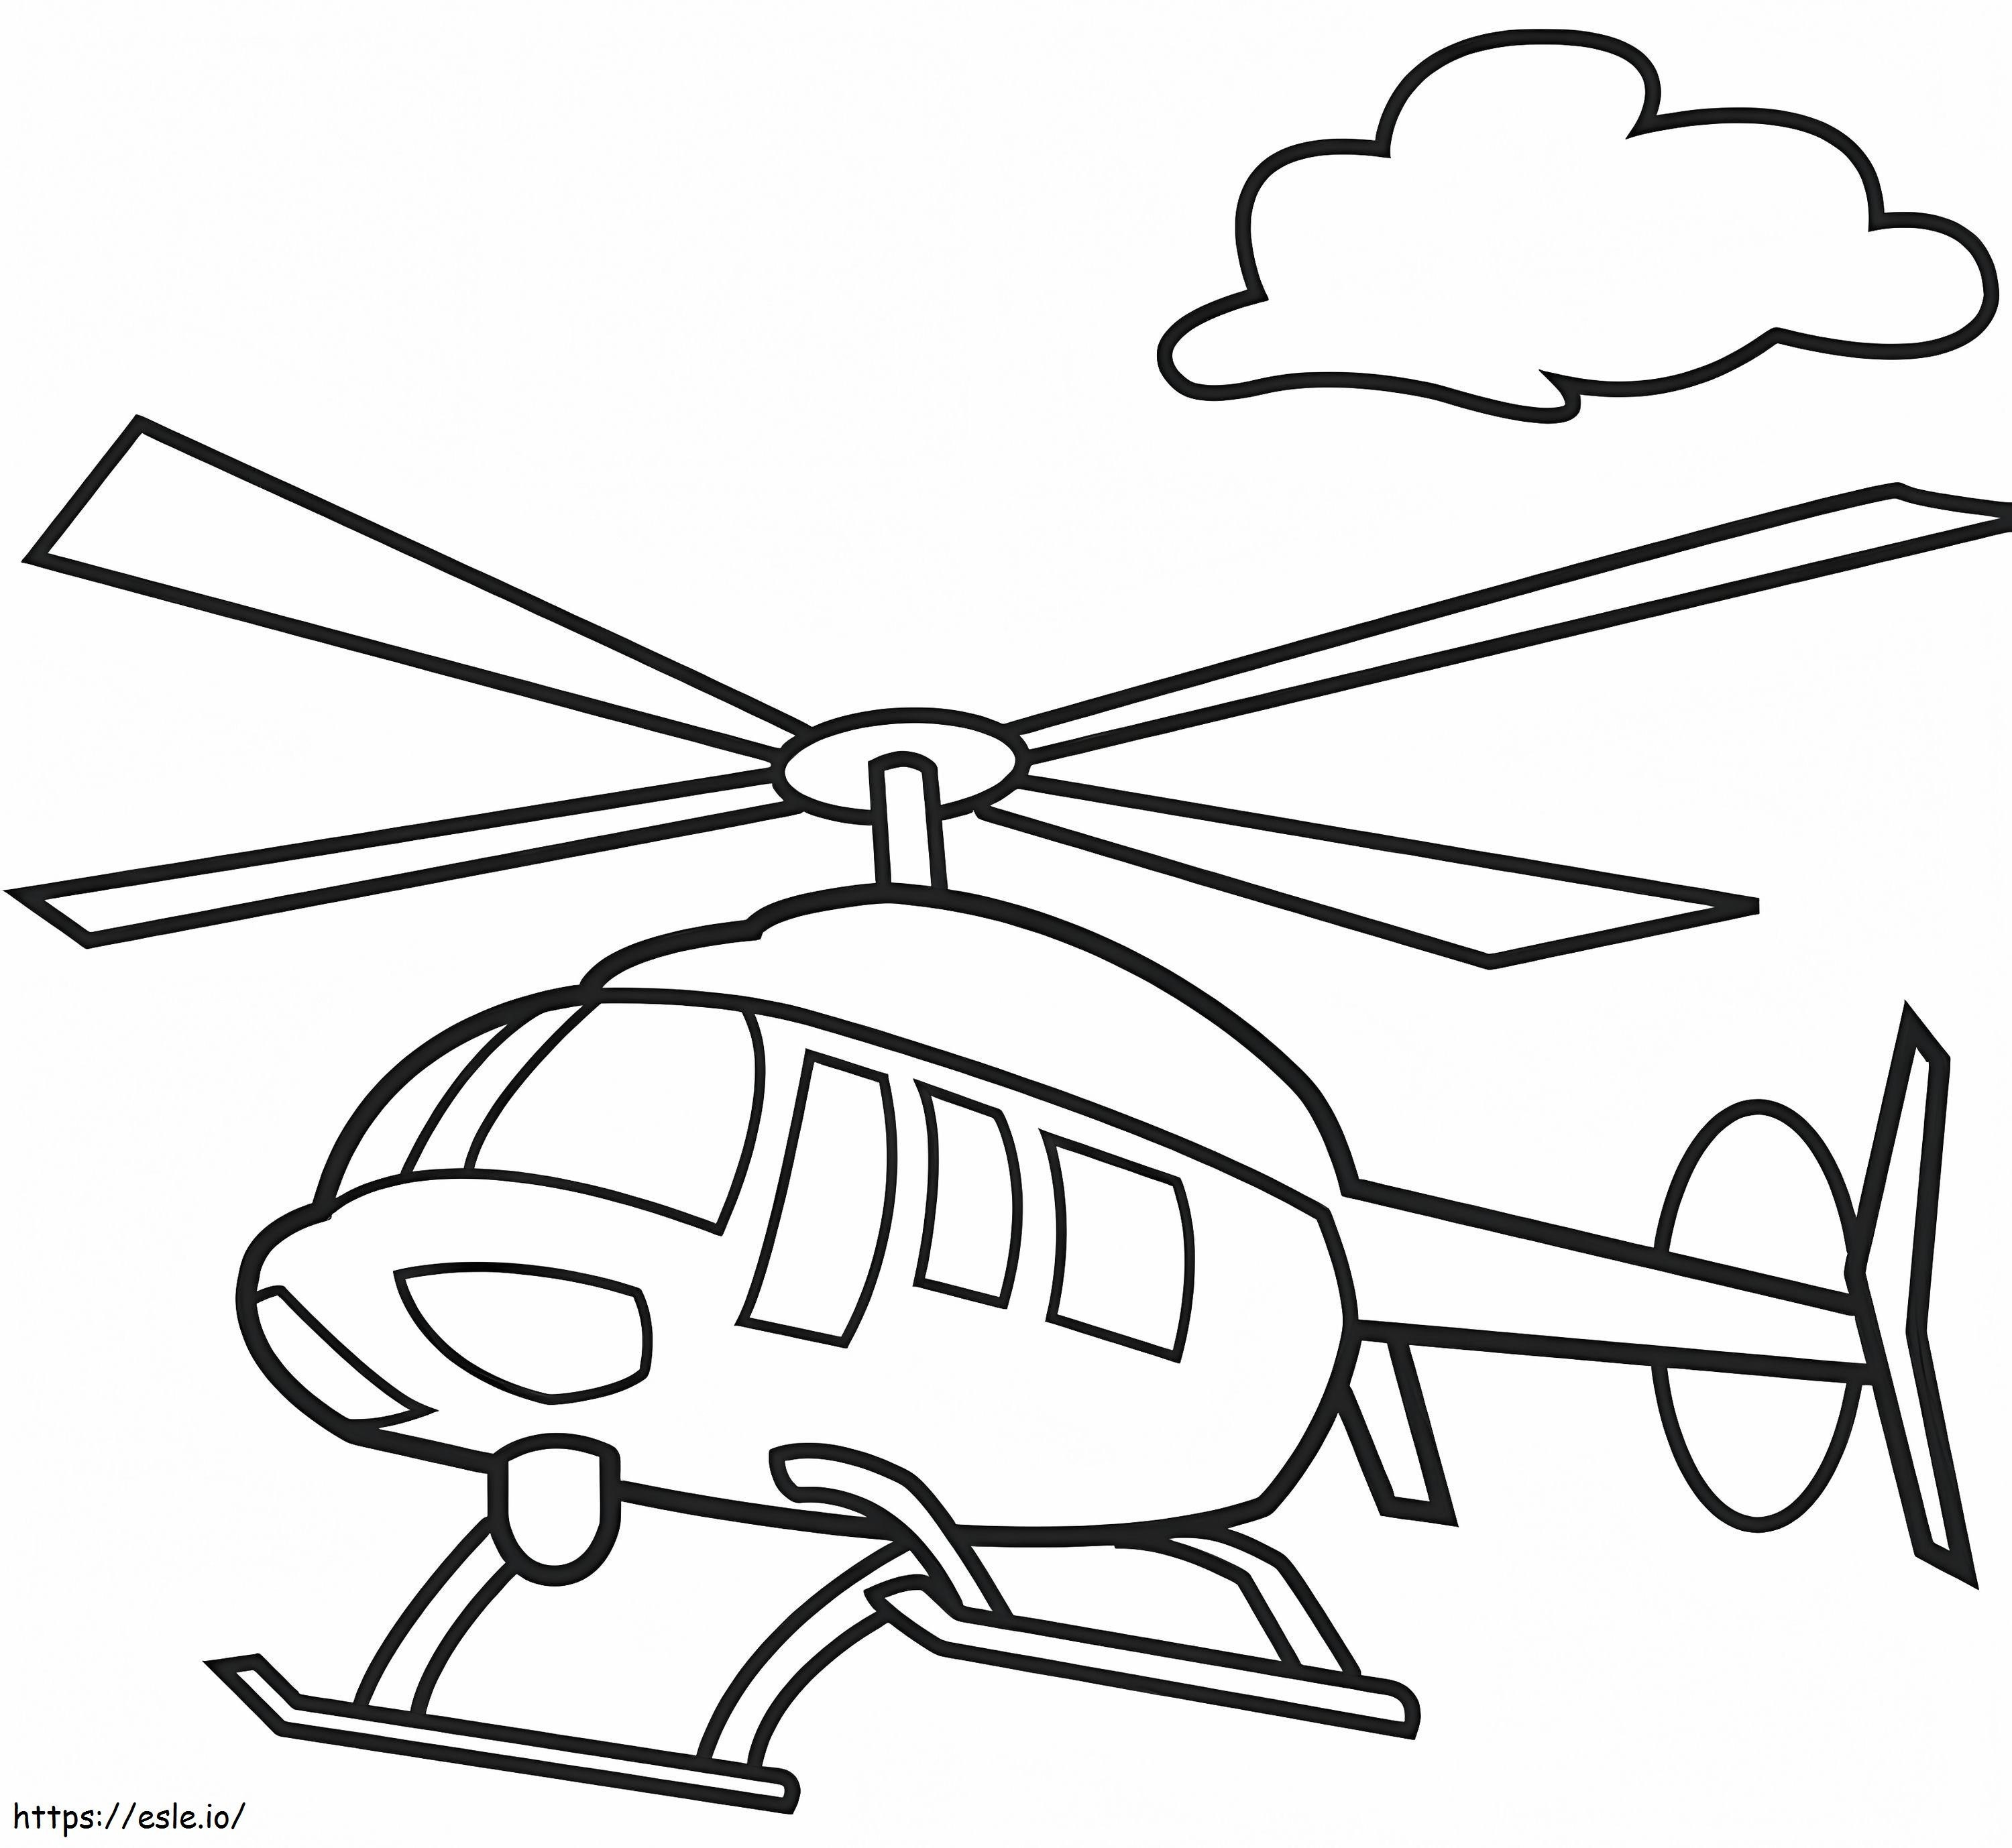 Helicopter 3 coloring page